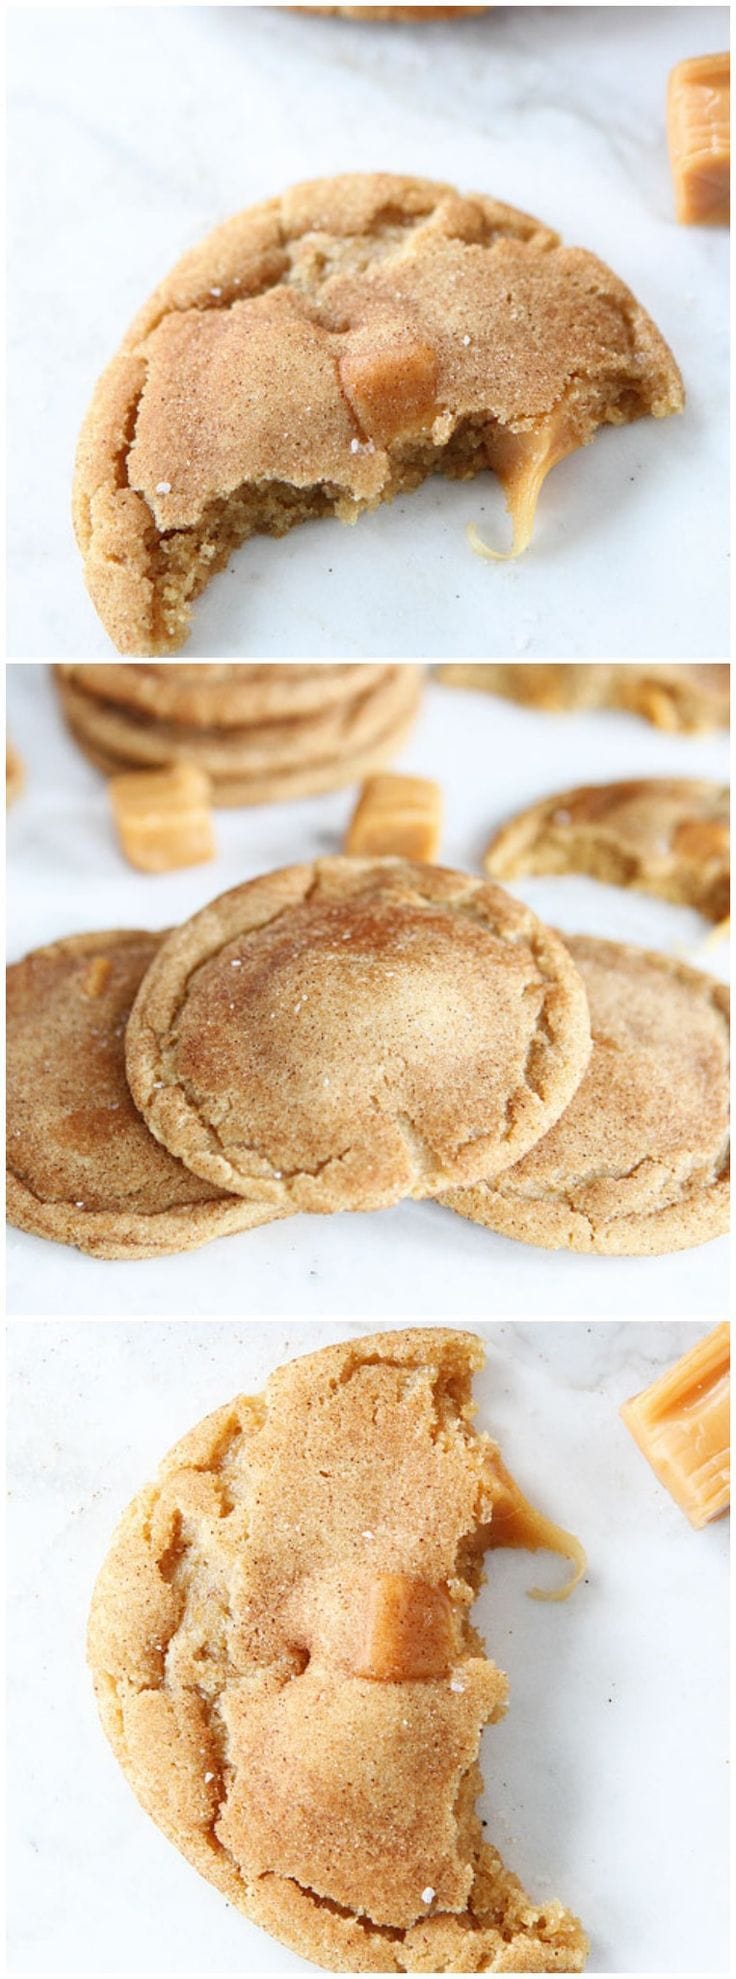 Brown Butter Salted Caramel Snickerdoodle Recipe on twopeasandtheirpod.com The BEST snickerdoodles! Everyone loves these cookies!